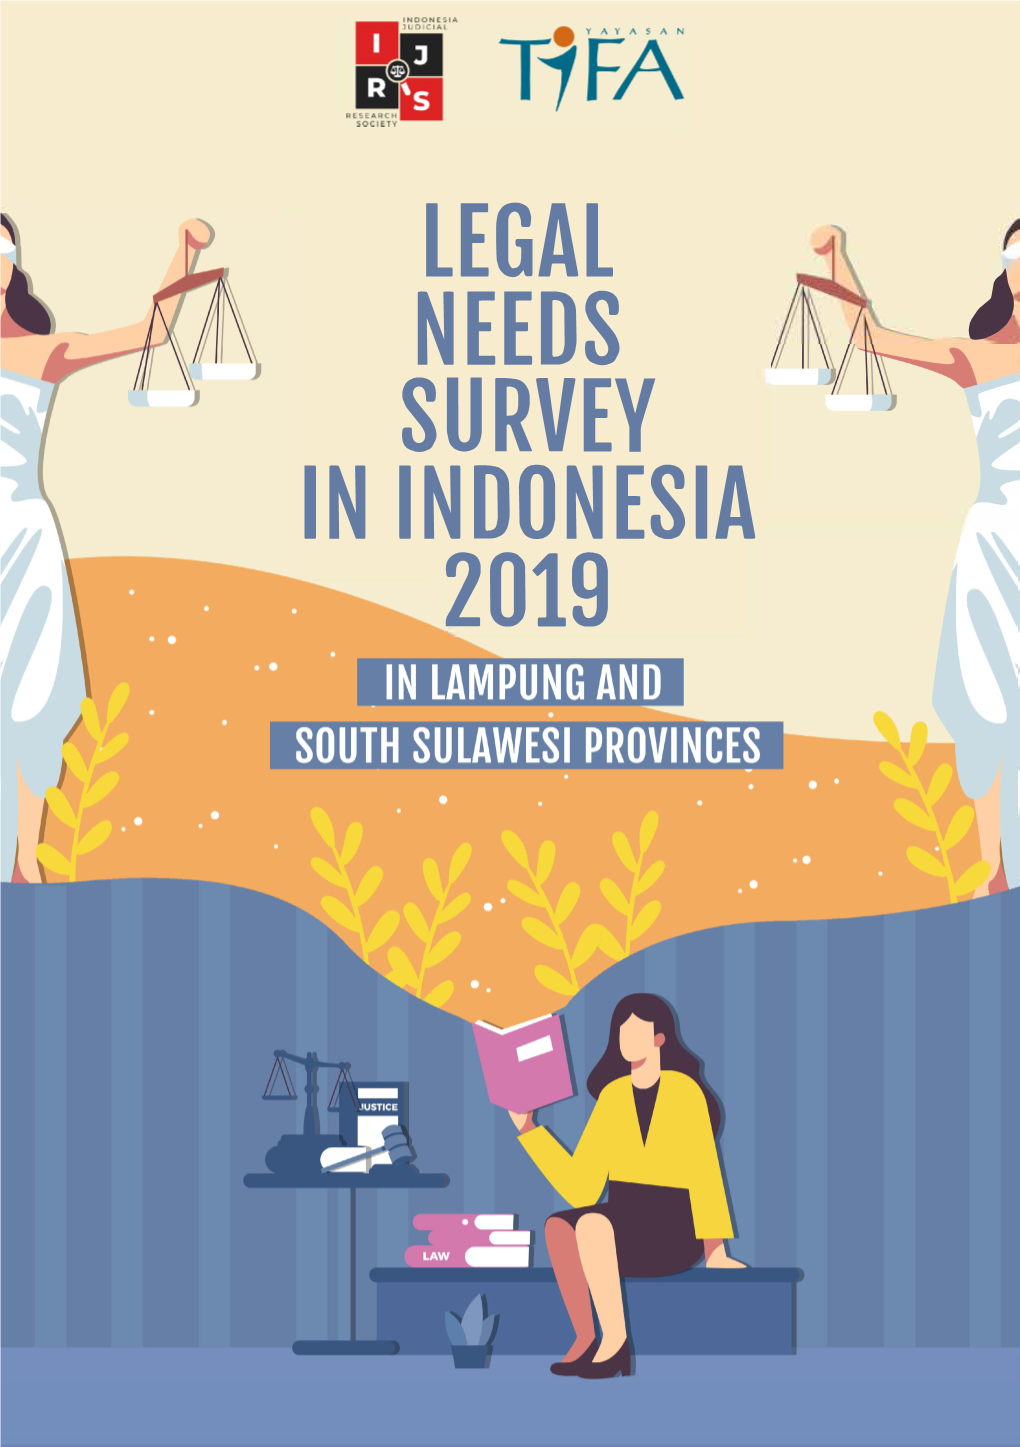 LEGAL NEEDS ' SURVEY in INDONESIA 2019 LEGAL NEEDS SURVEY in INDONESIA 2019: in Lampung and South Sulawesi Provinces